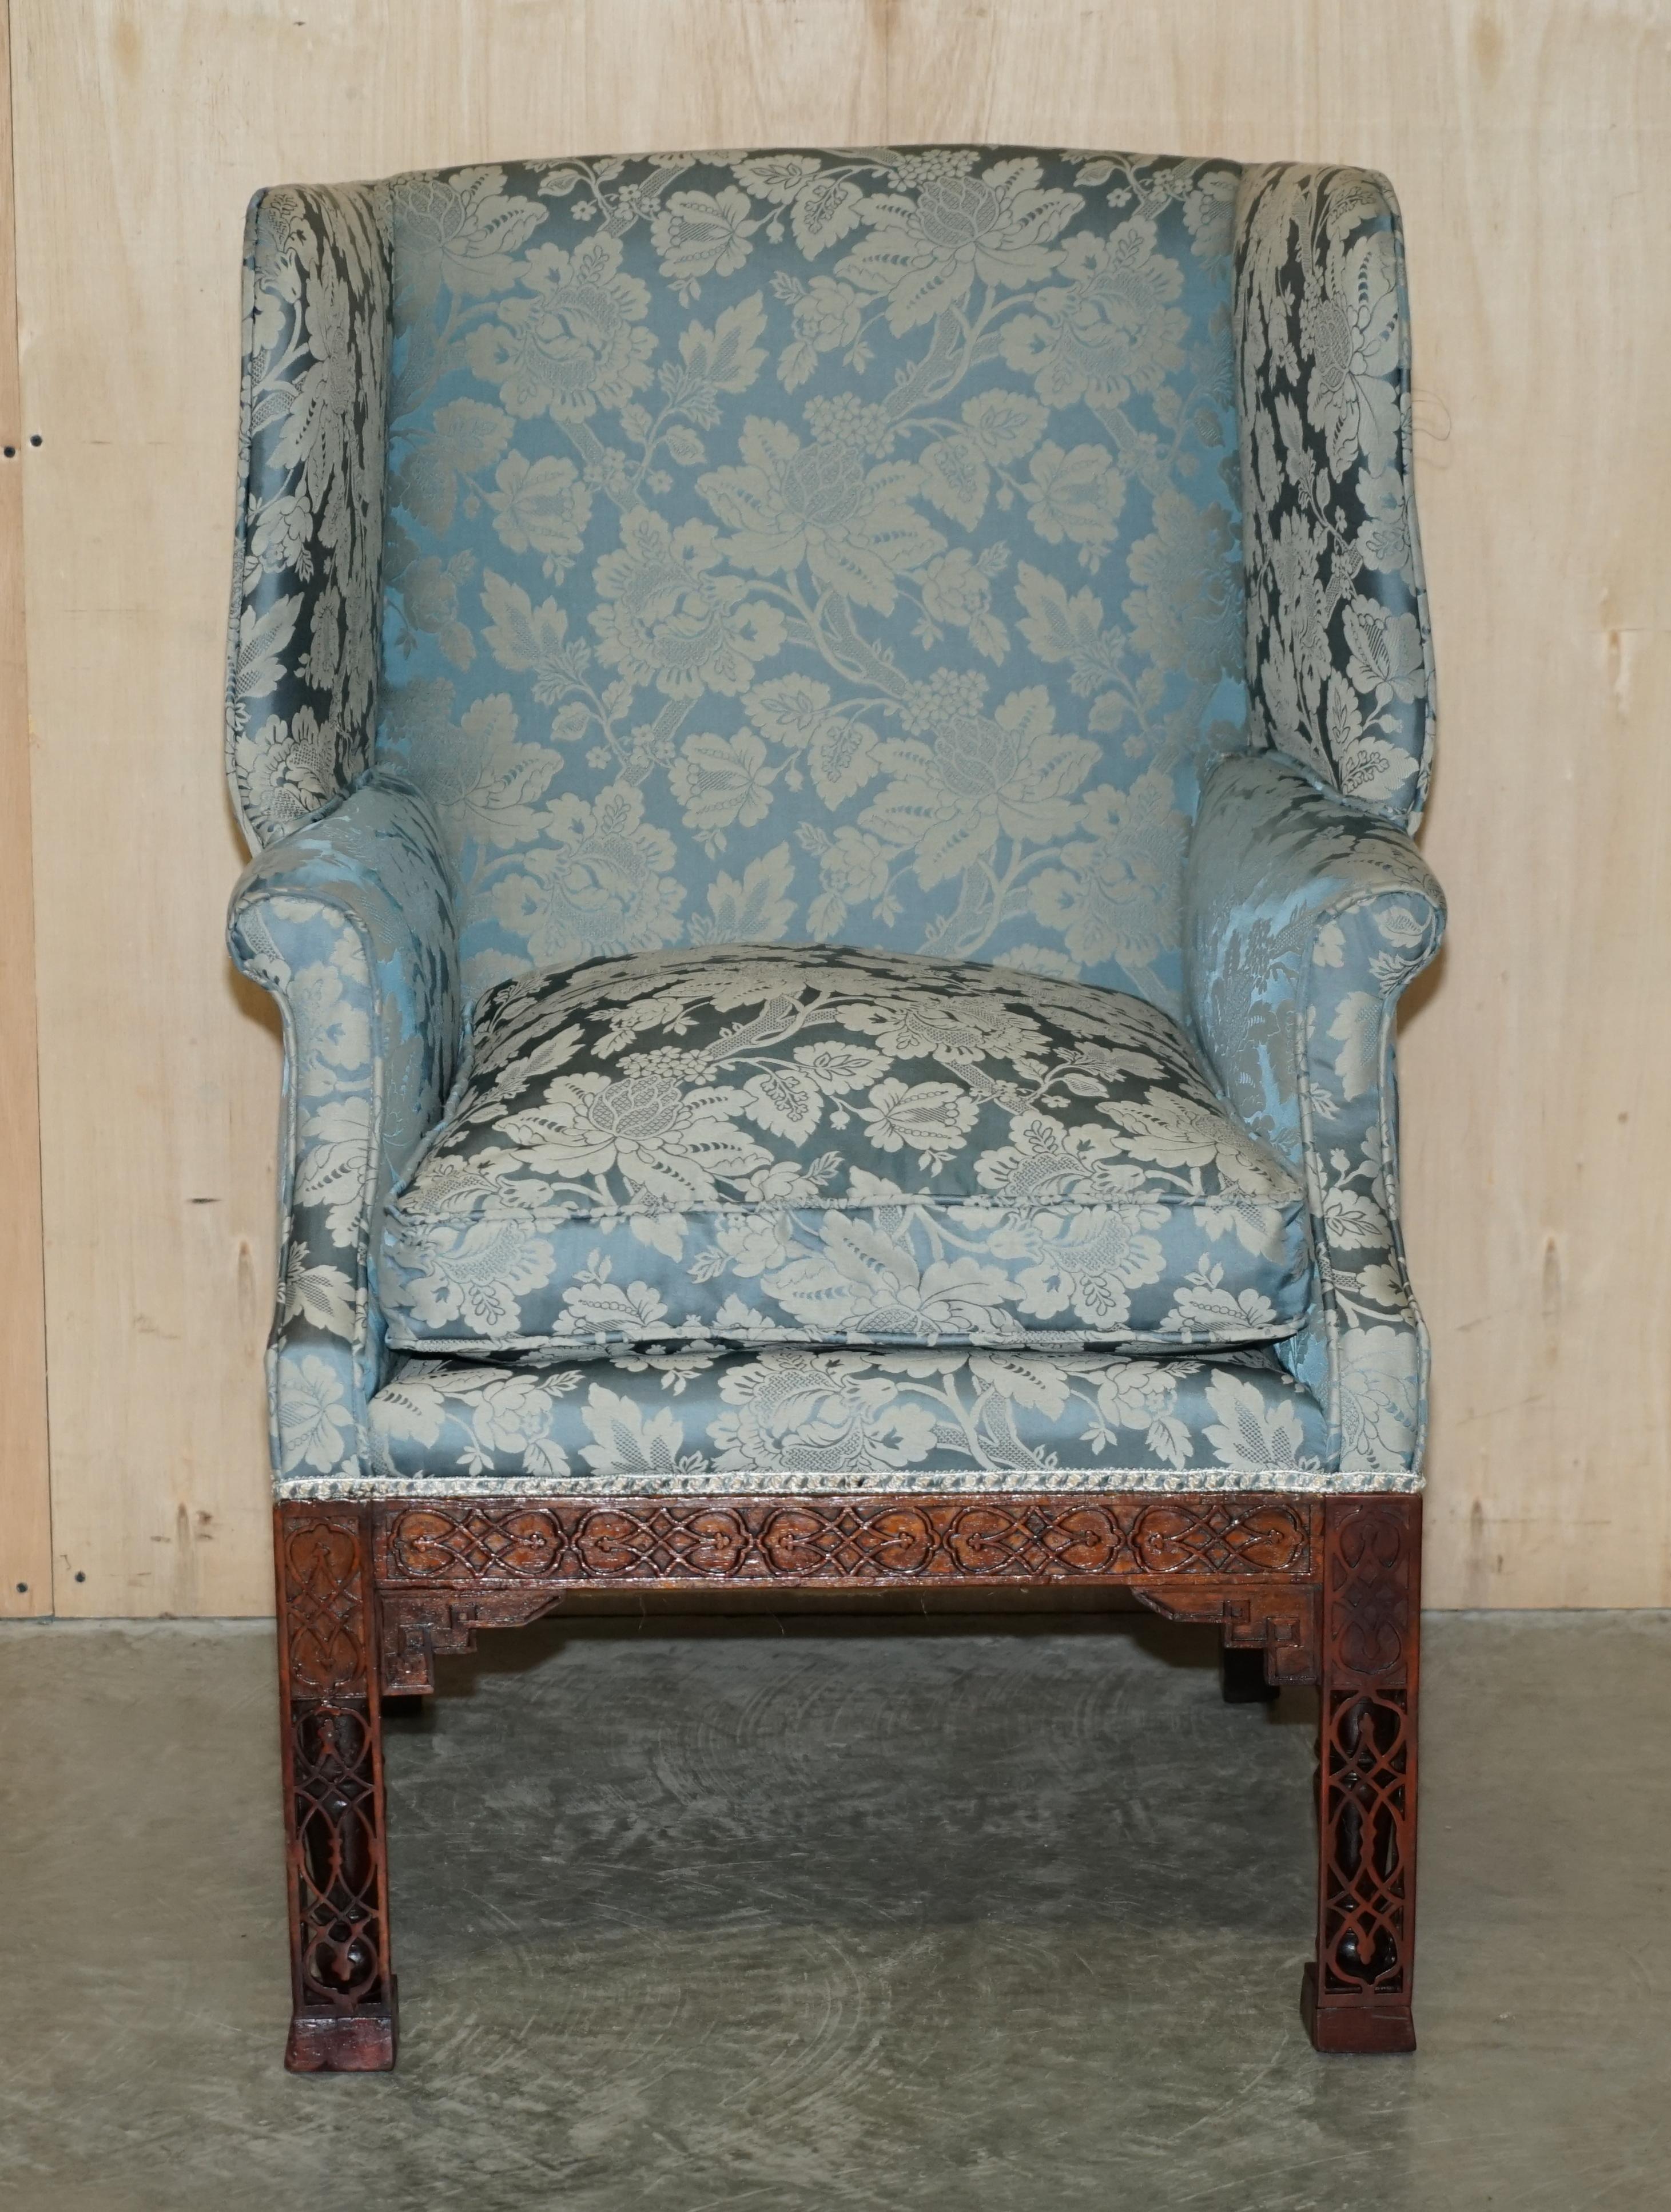 ANTIQUE CIRCA 1820 THOMAS CHIPPENDALE HAND CARVED WiNGBACK ARMCHAIR (Chinese Chippendale) im Angebot